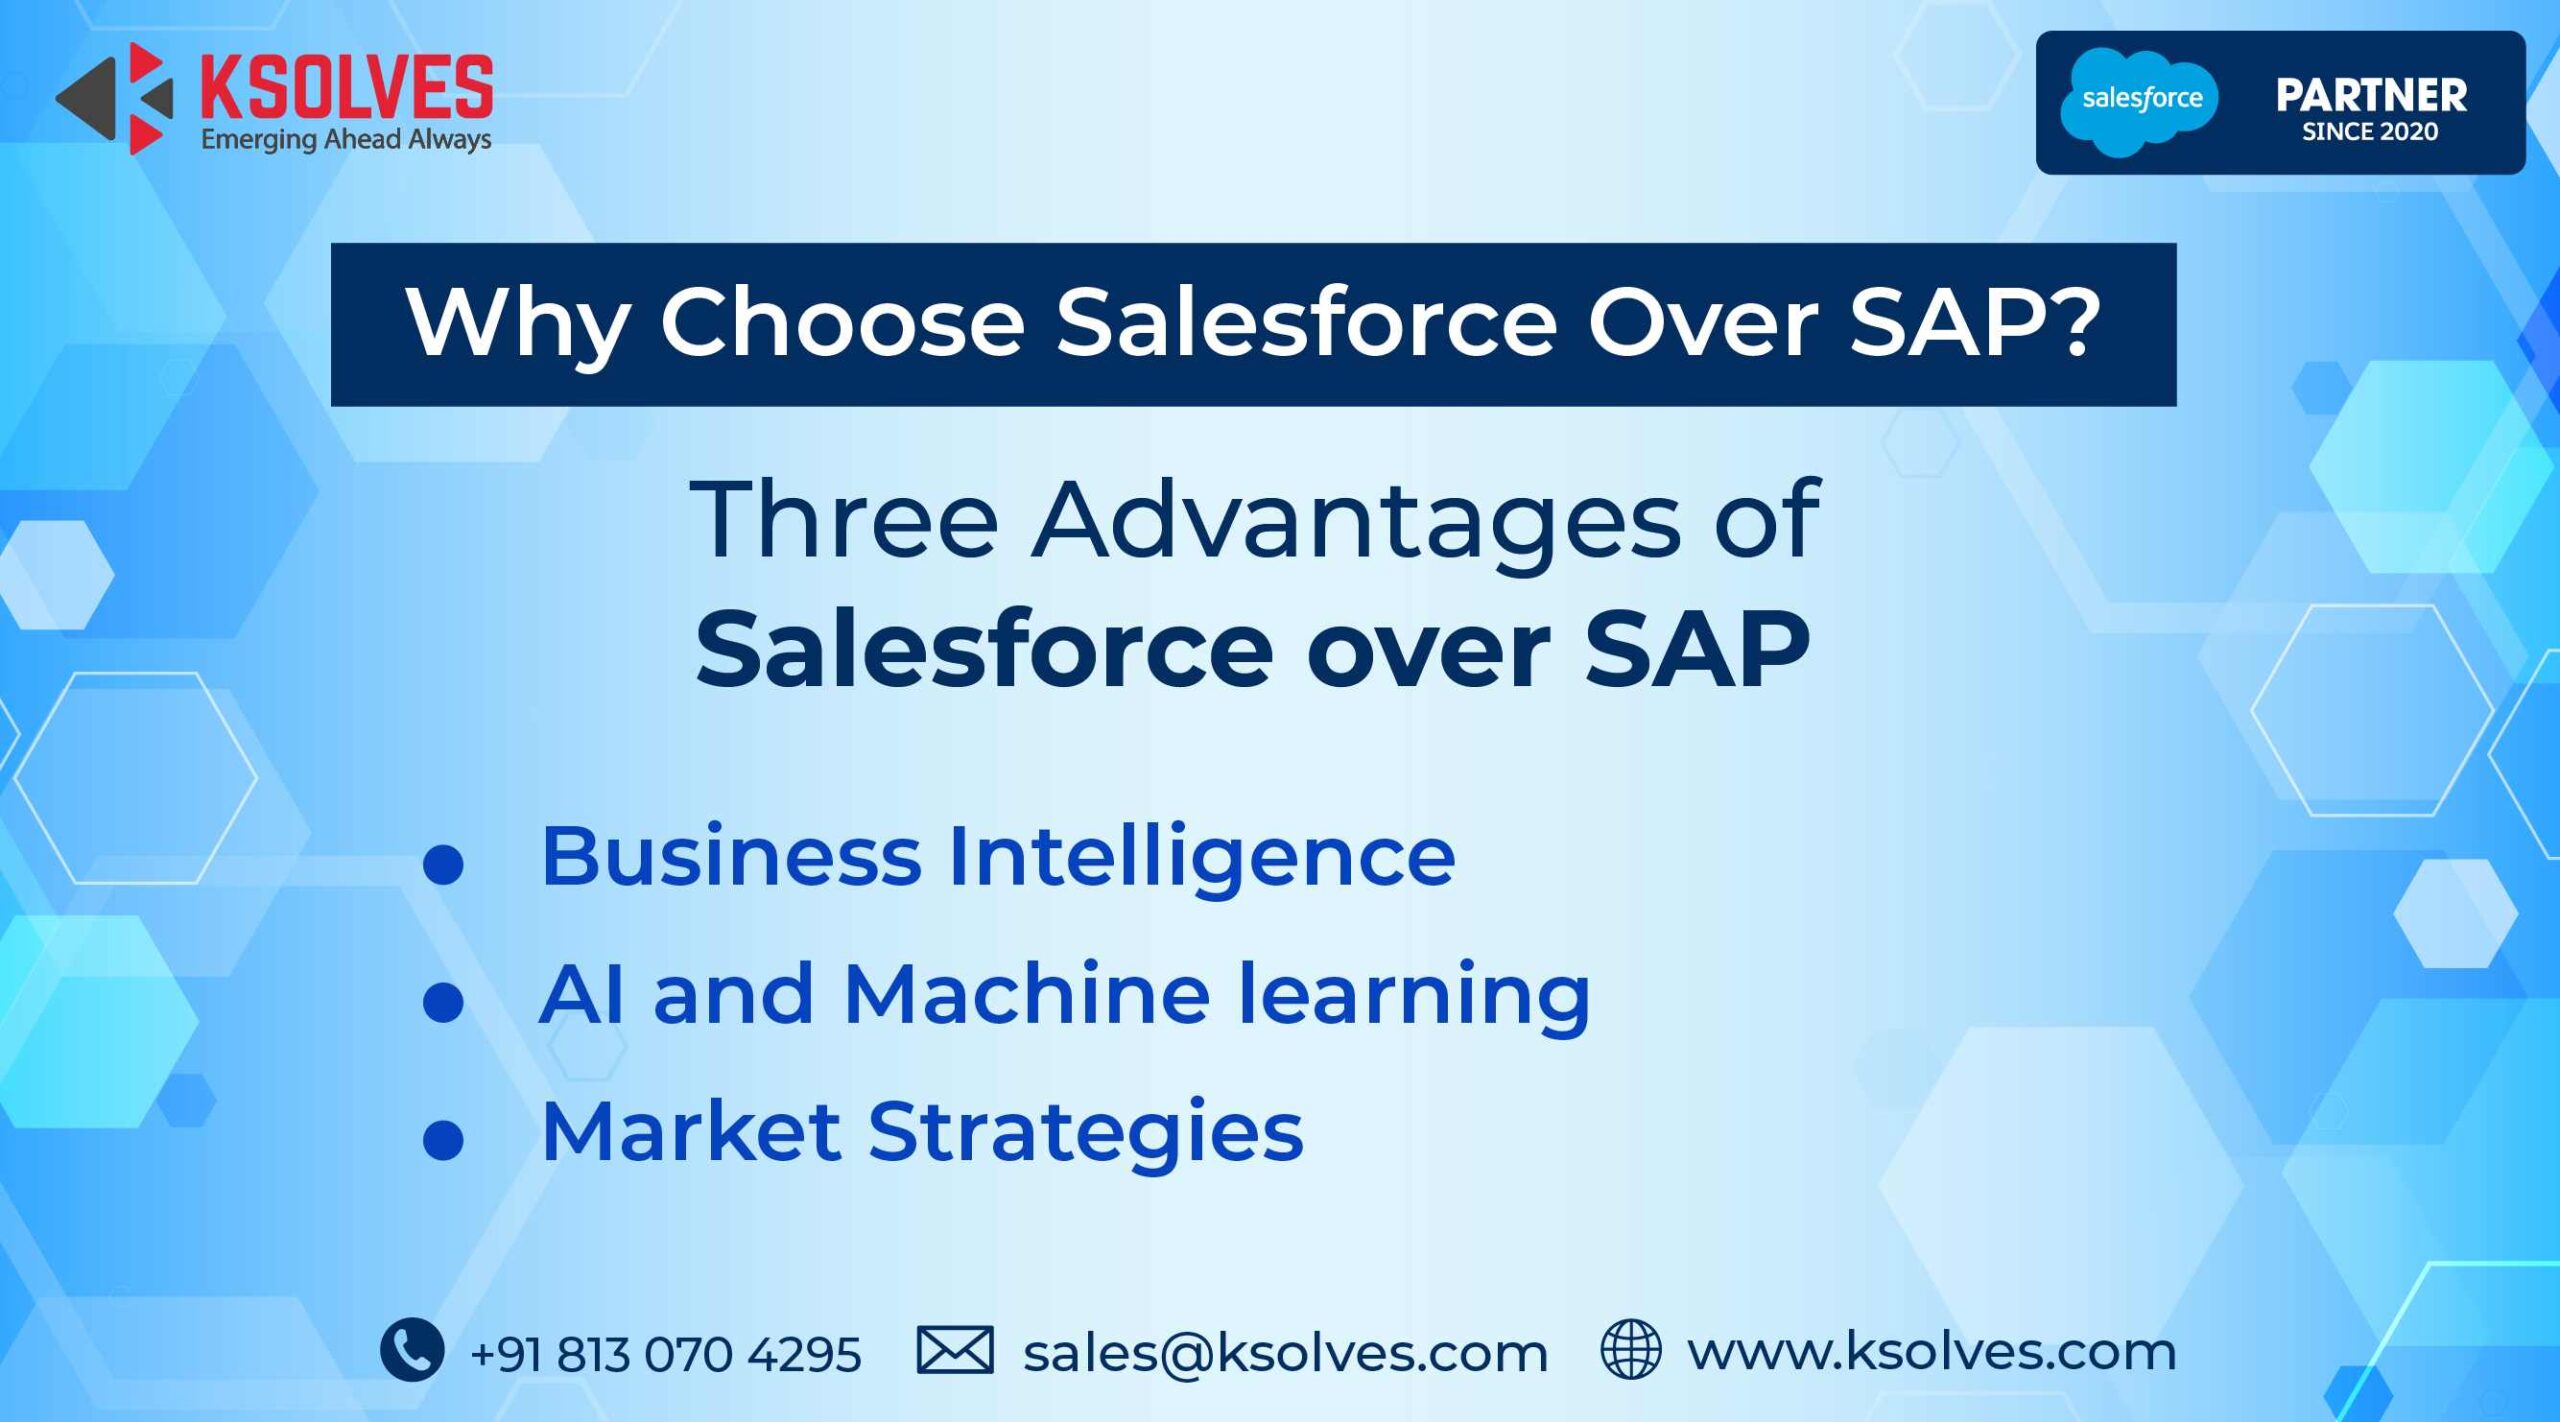 Why Choose Salesforce Over SAP?